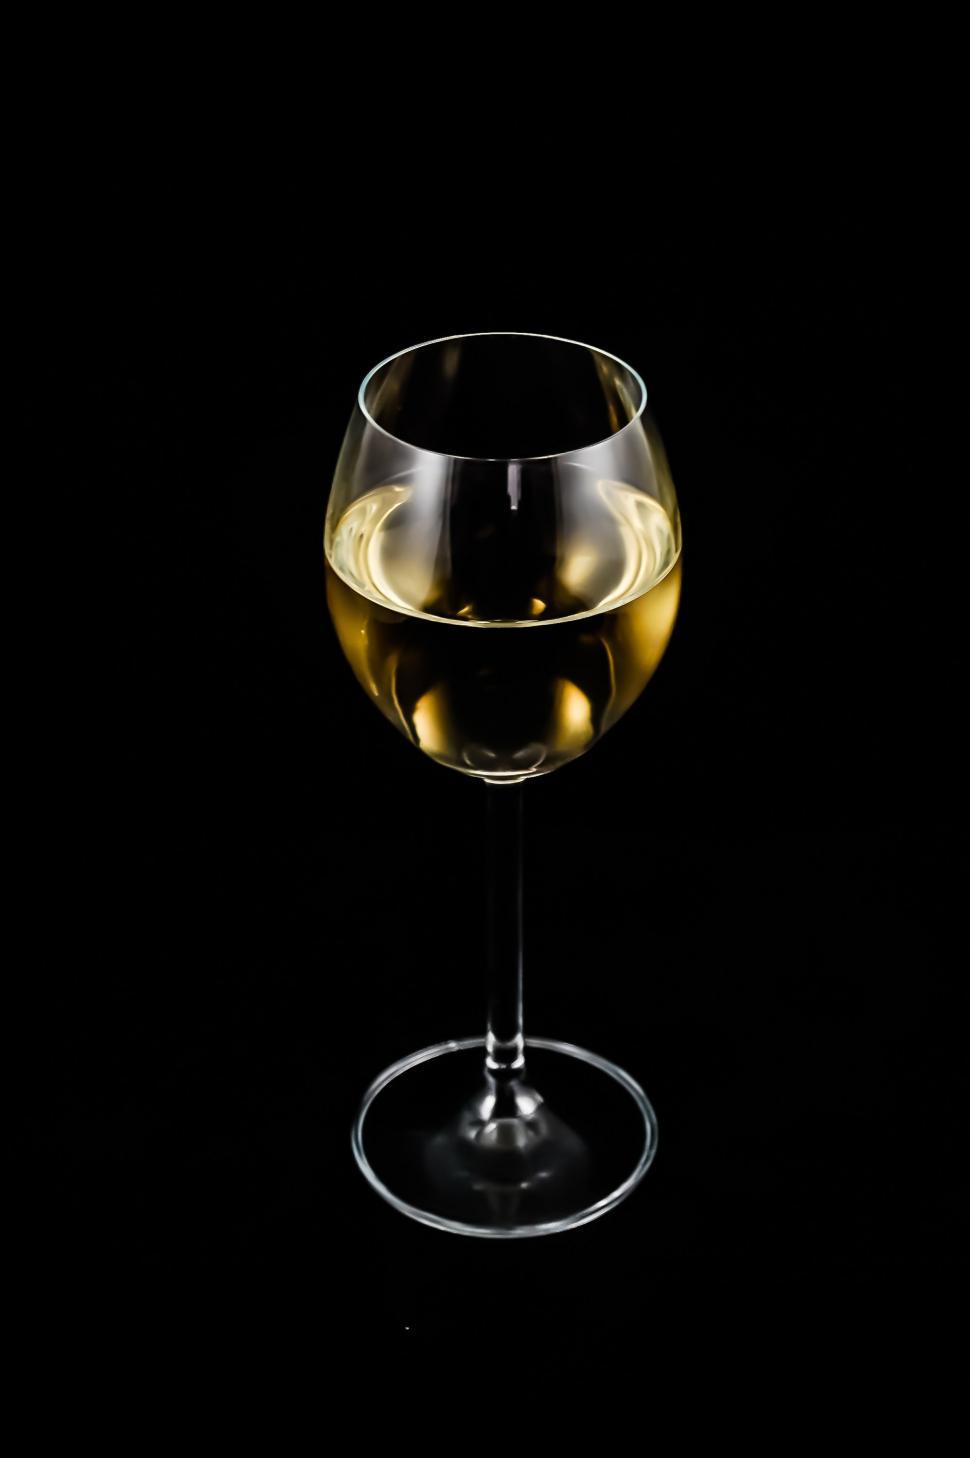 Free Image of Glass of White Wine on Black Background 